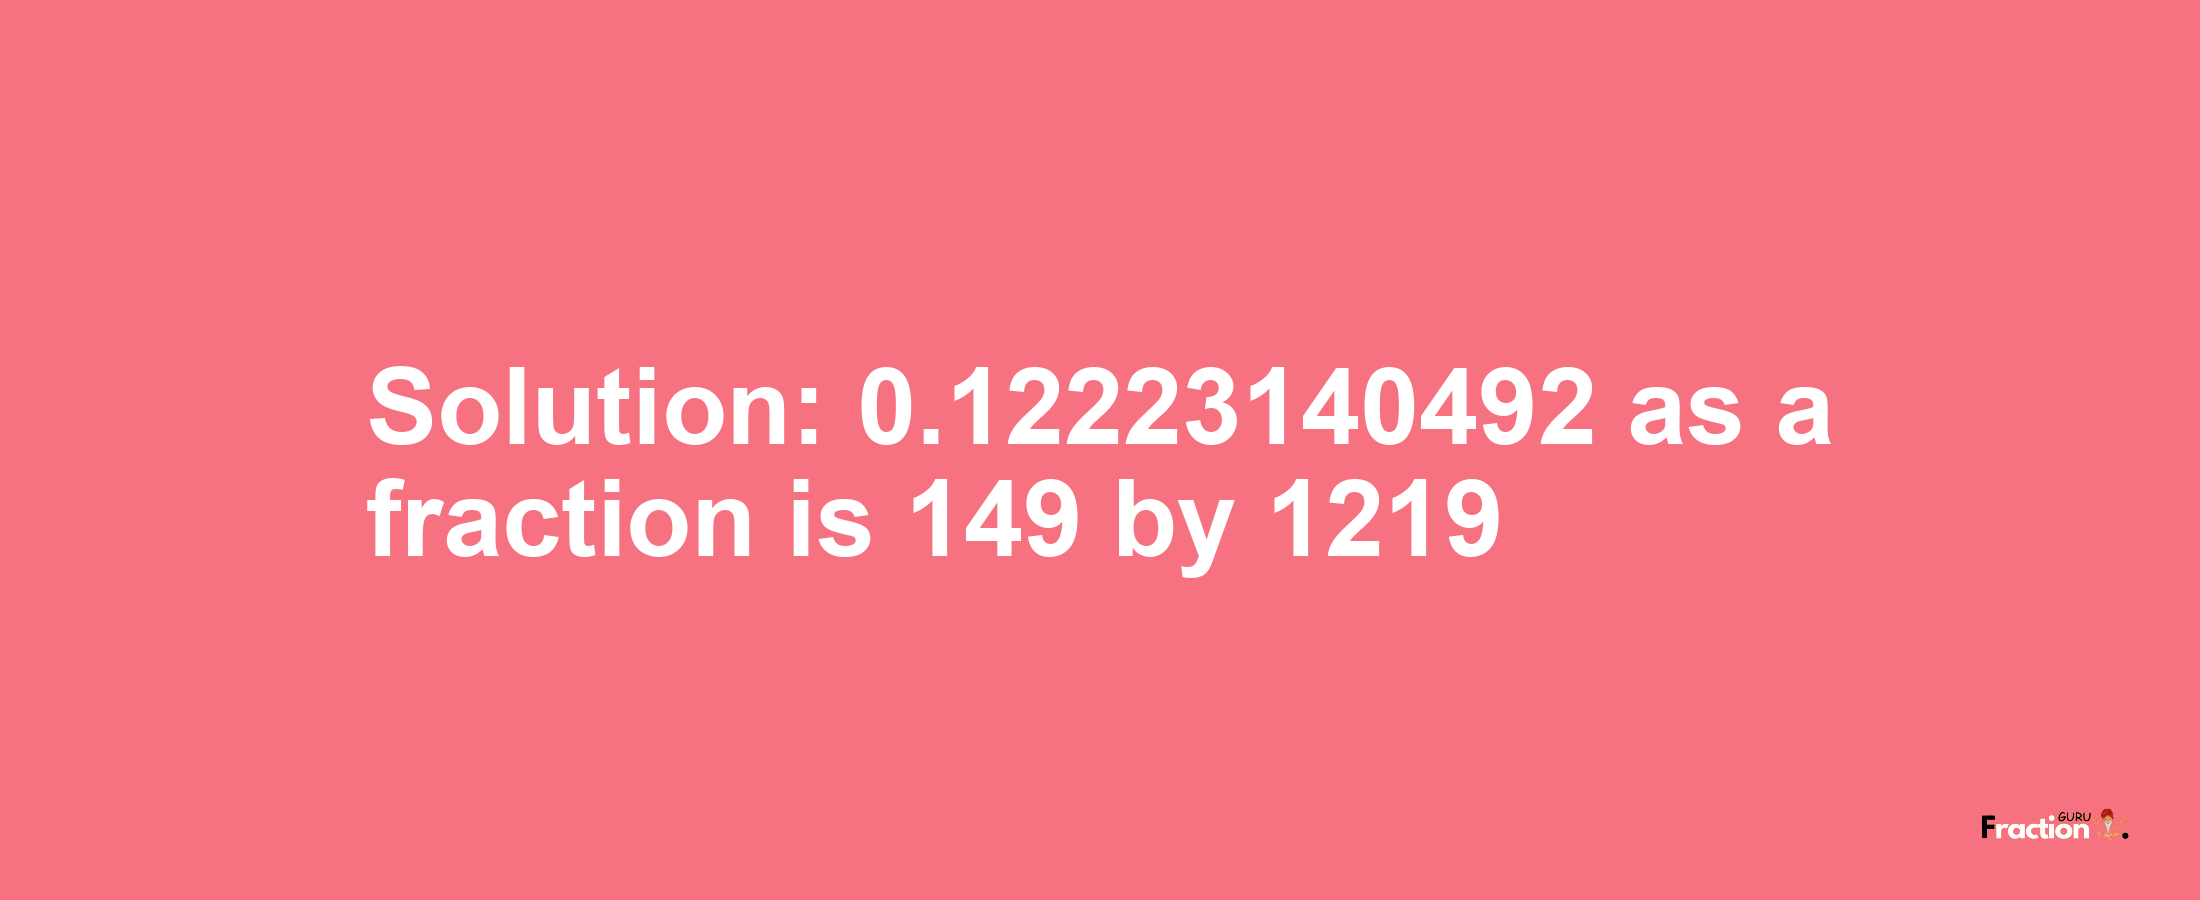 Solution:0.12223140492 as a fraction is 149/1219